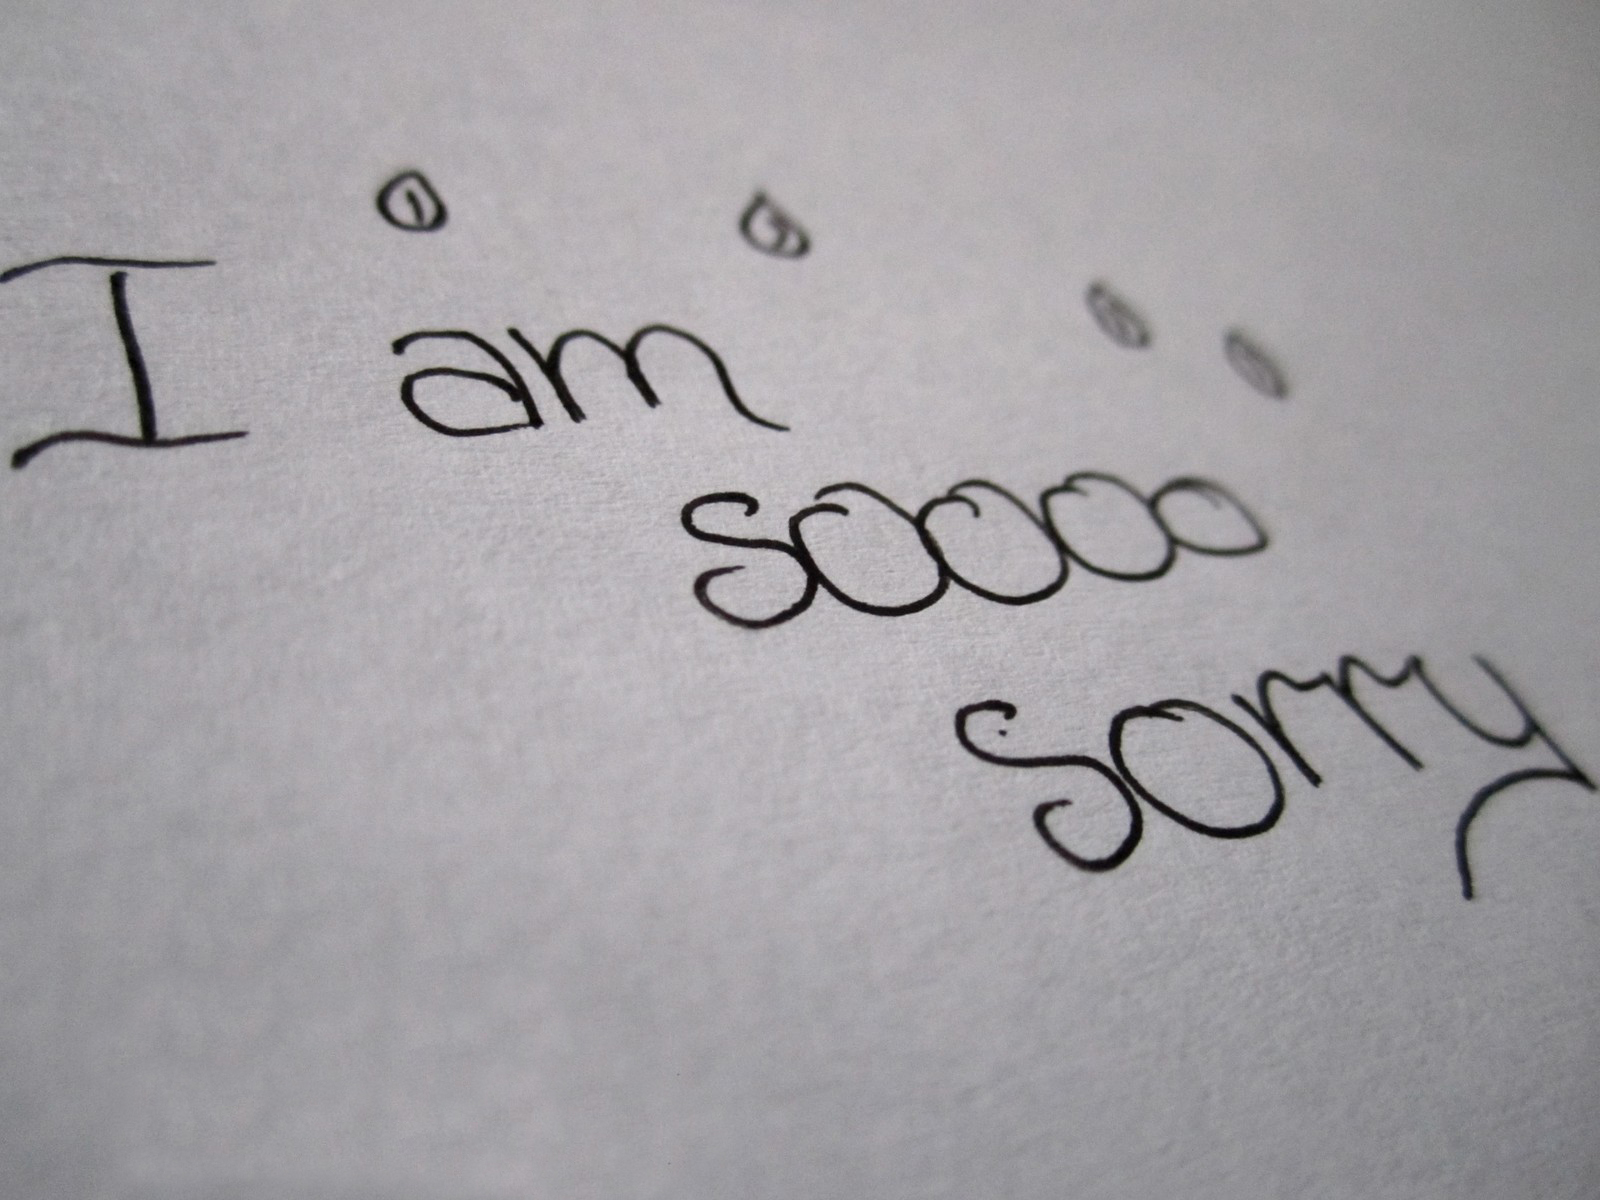 Am So Sorry Image Daily Pics Update HD Wallpaper